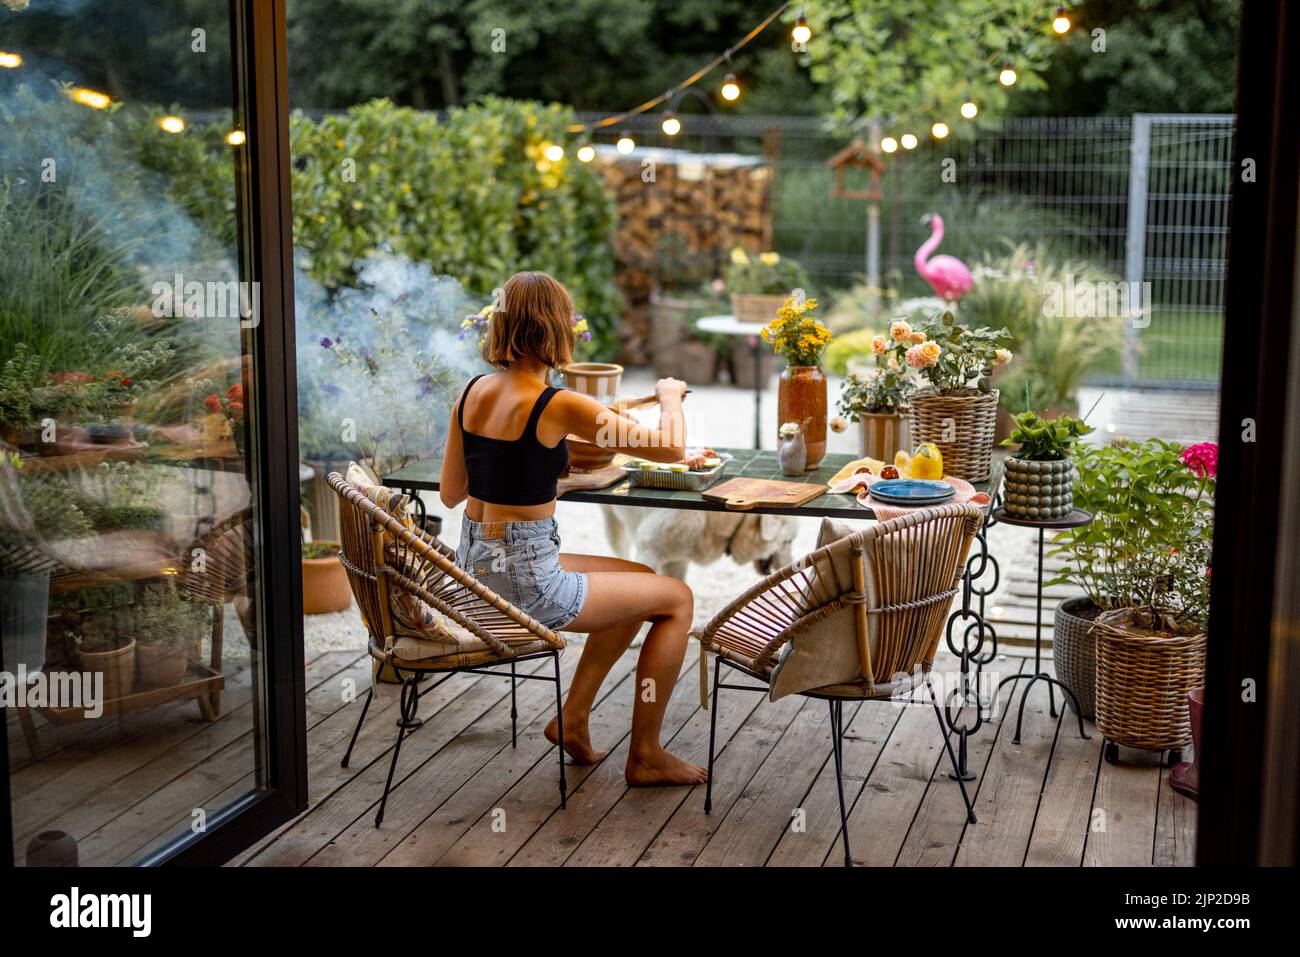 Woman cooks food on disposable grill while sitting relaxed by the table on cozy terrace during the evening at beautiful backyard Stock Photo